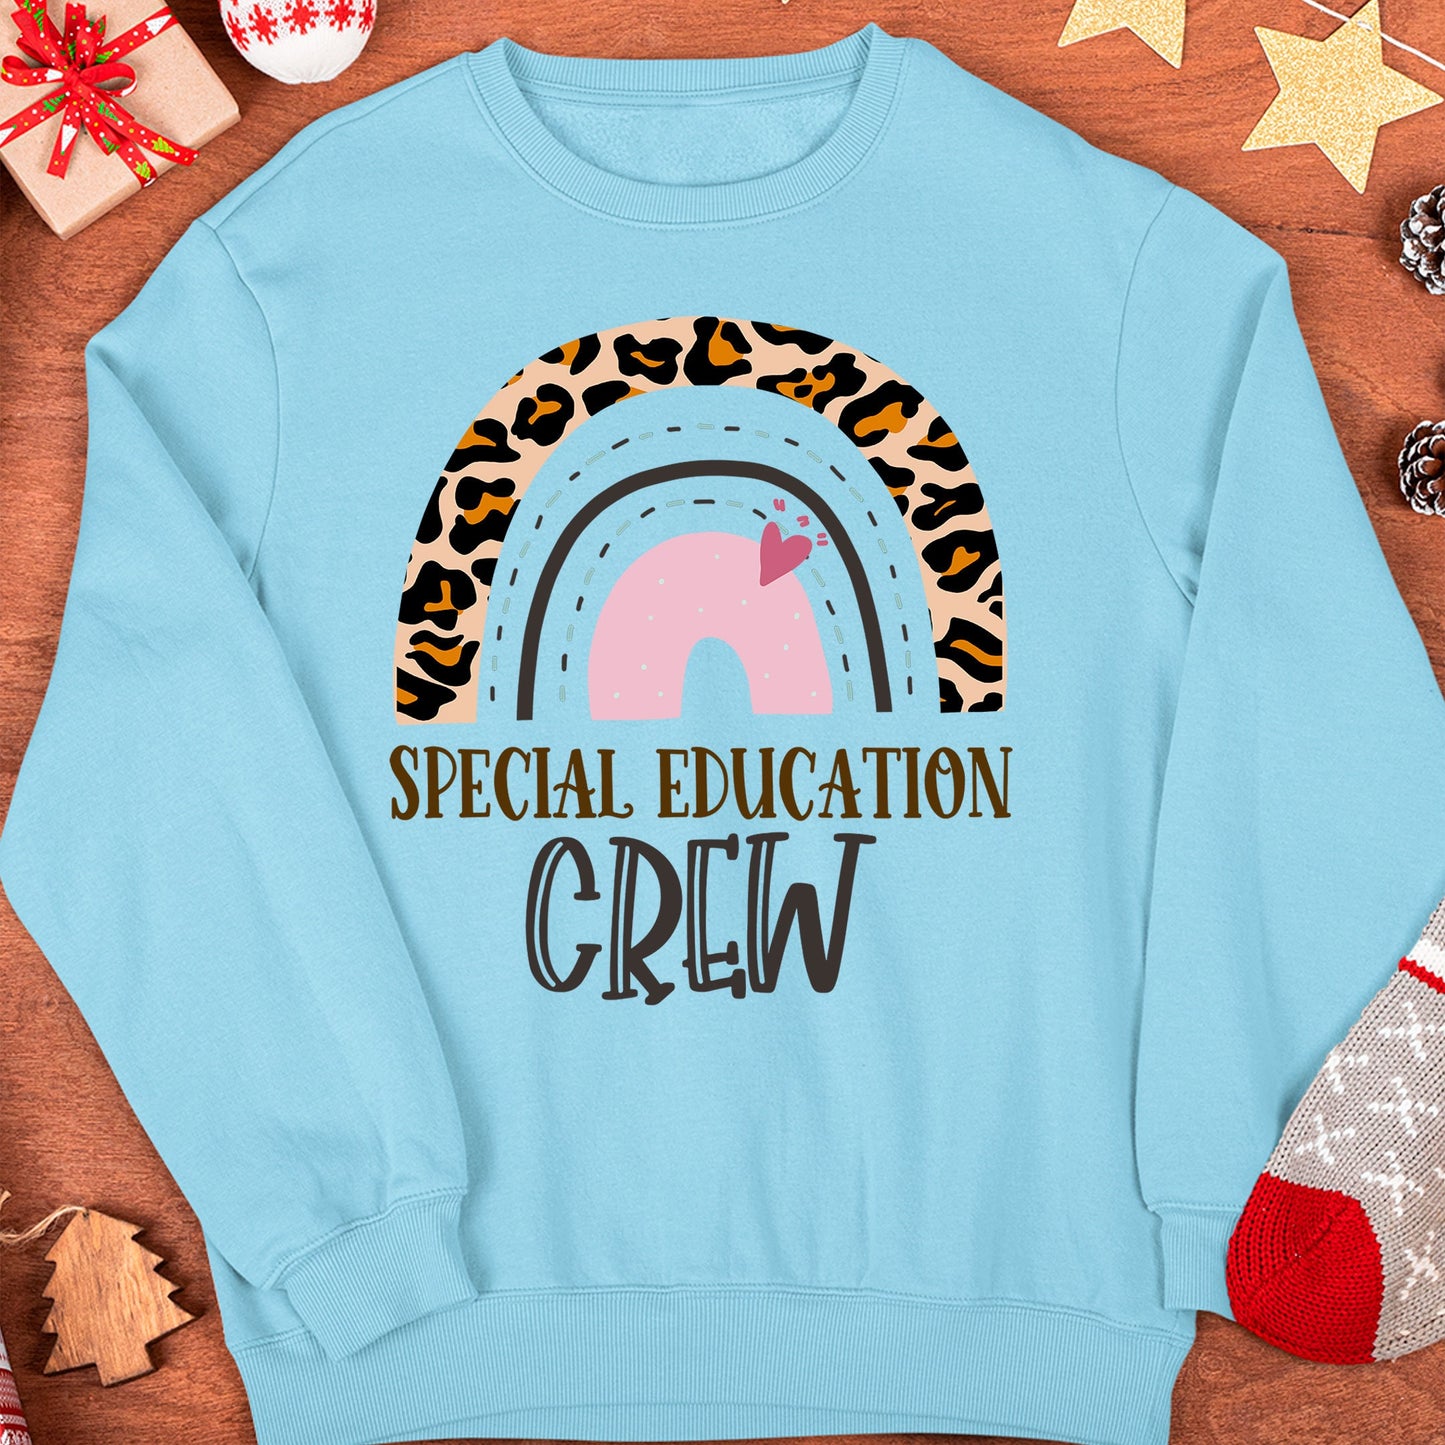 Special Education Crew Sweatshirt, Dream Team Teacher Sweater, Paraprofessional, Spec Ed Therapy, Behavioral Therapy Intervention Squad Team